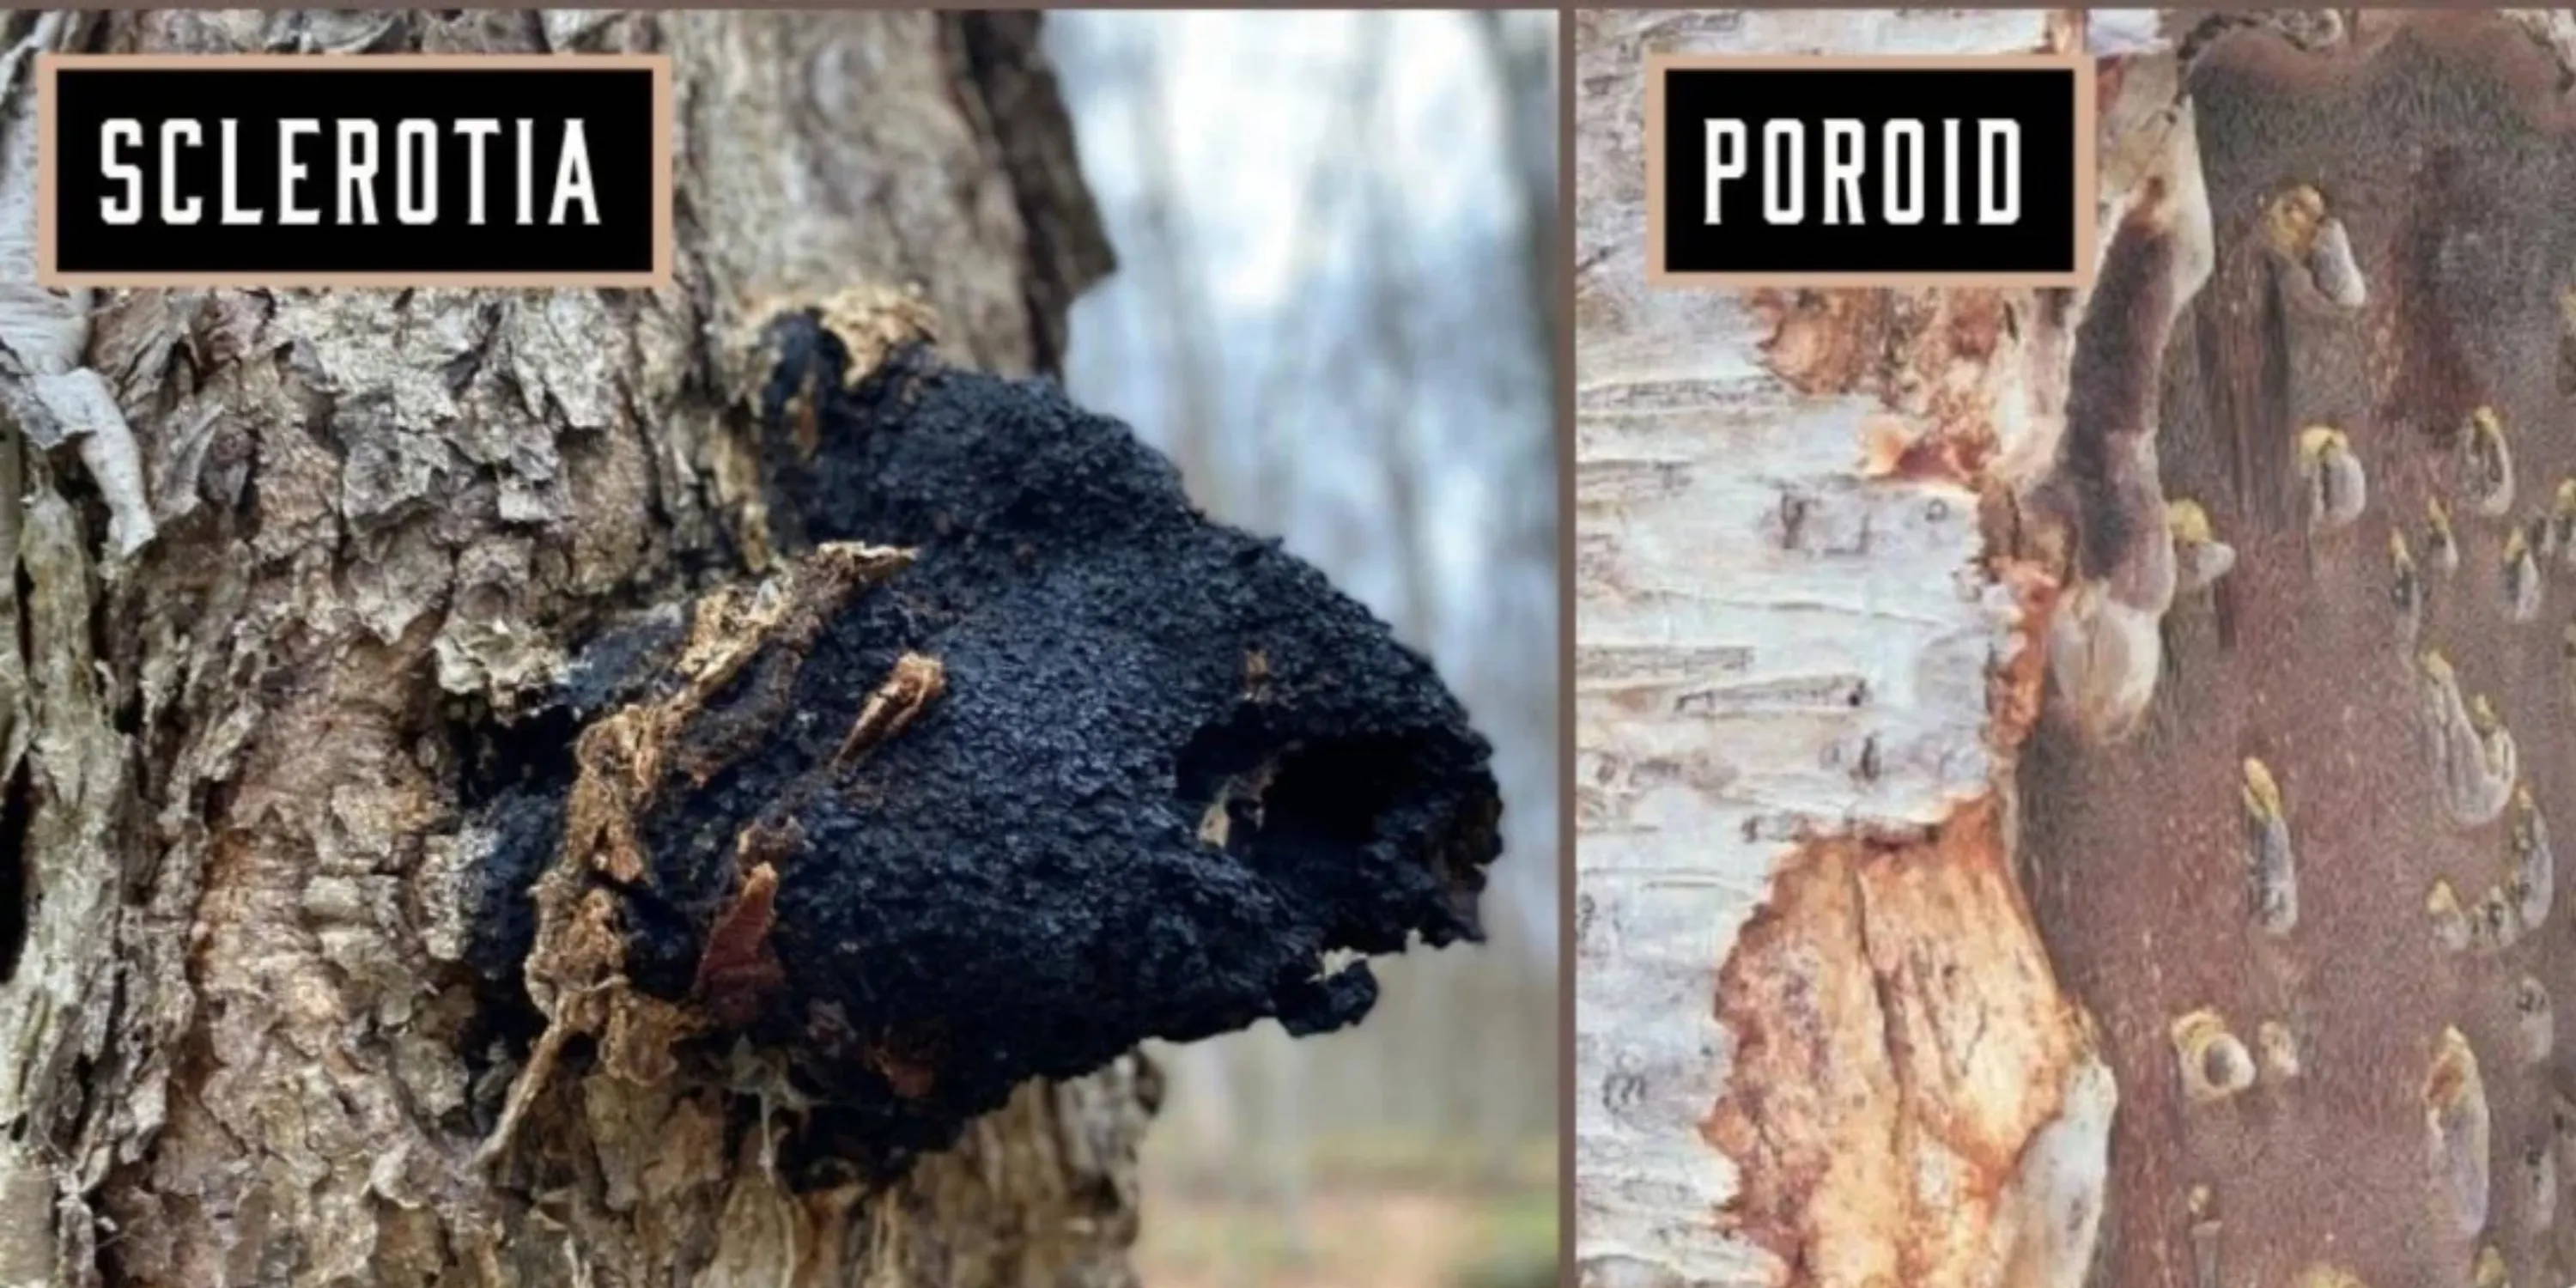 An Inonotus obliquus poroid and chaga sclerotia or conk pictures next to each other.